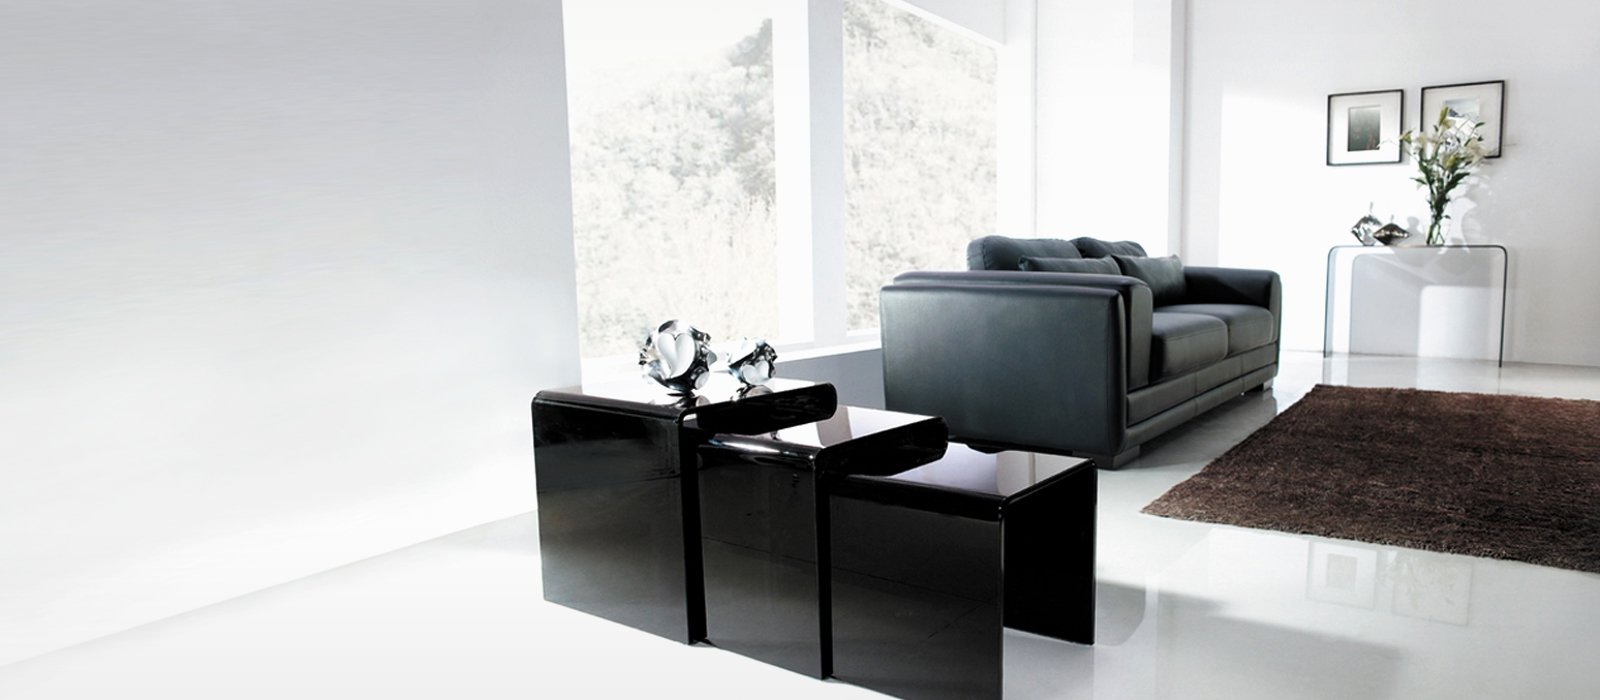 Black Nested Glass Tables - Glass Tables Online